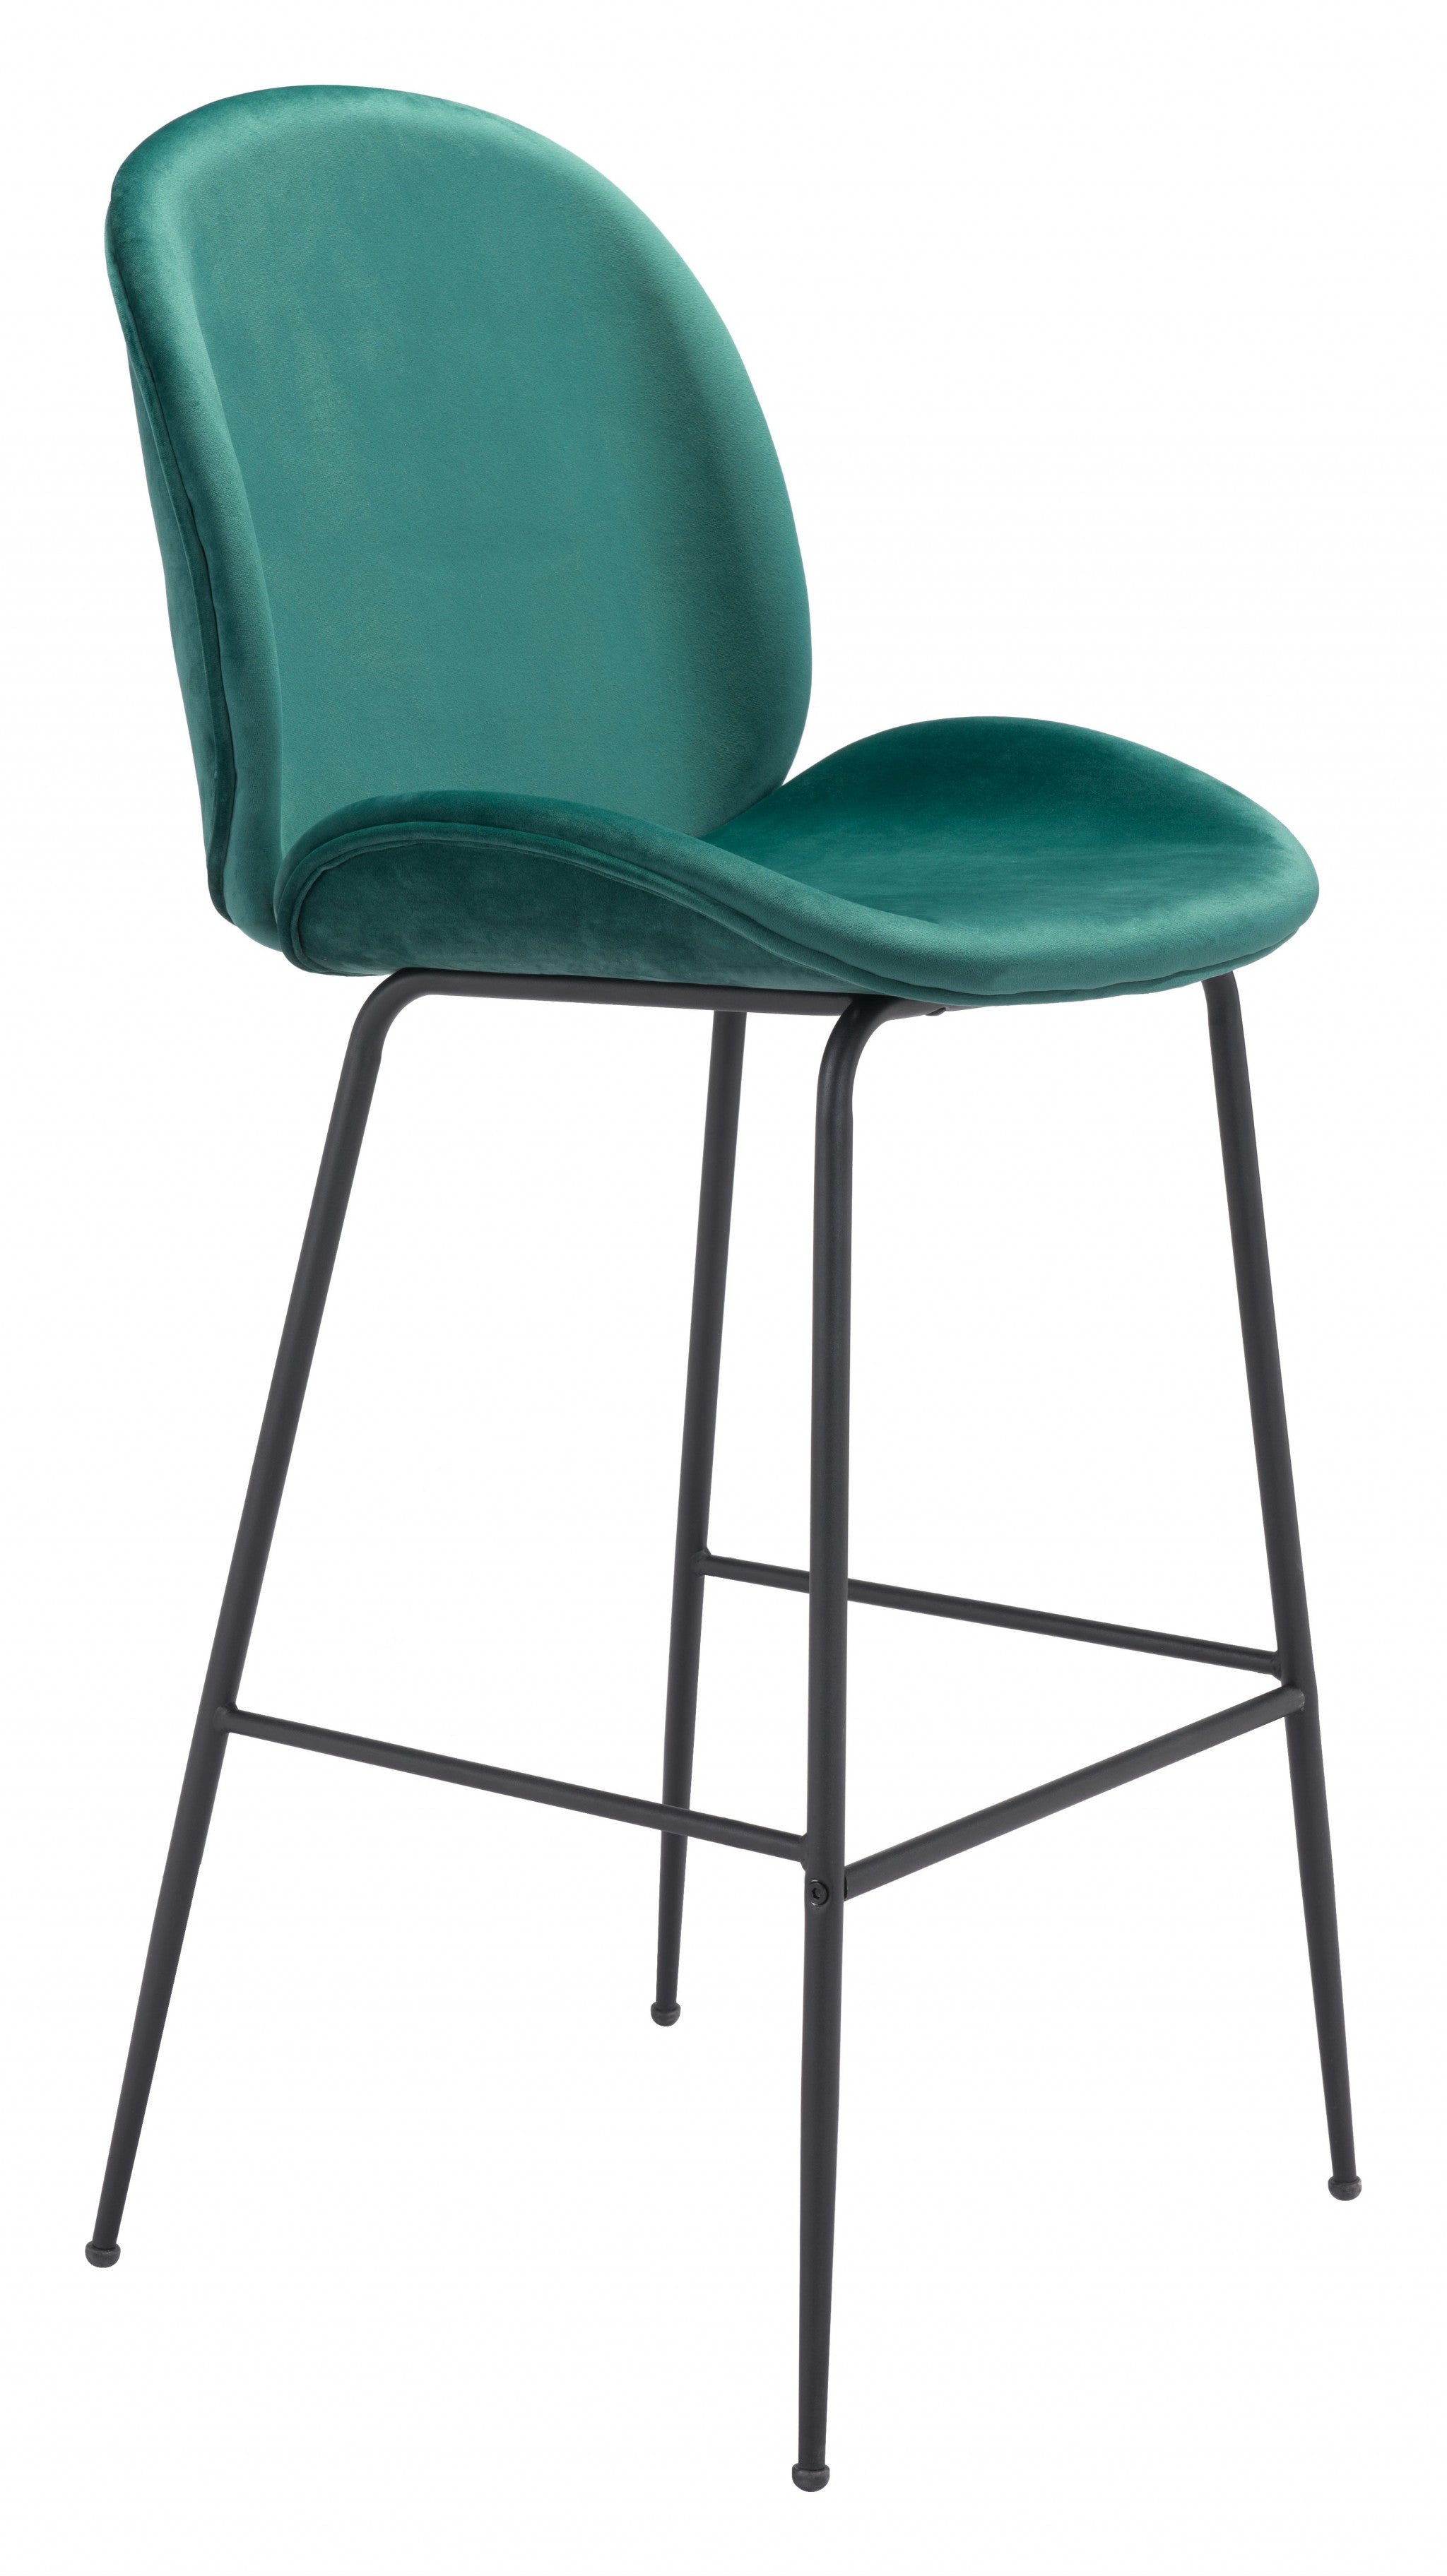 31" Green And Black Steel Low Back Bar Height Bar Chair